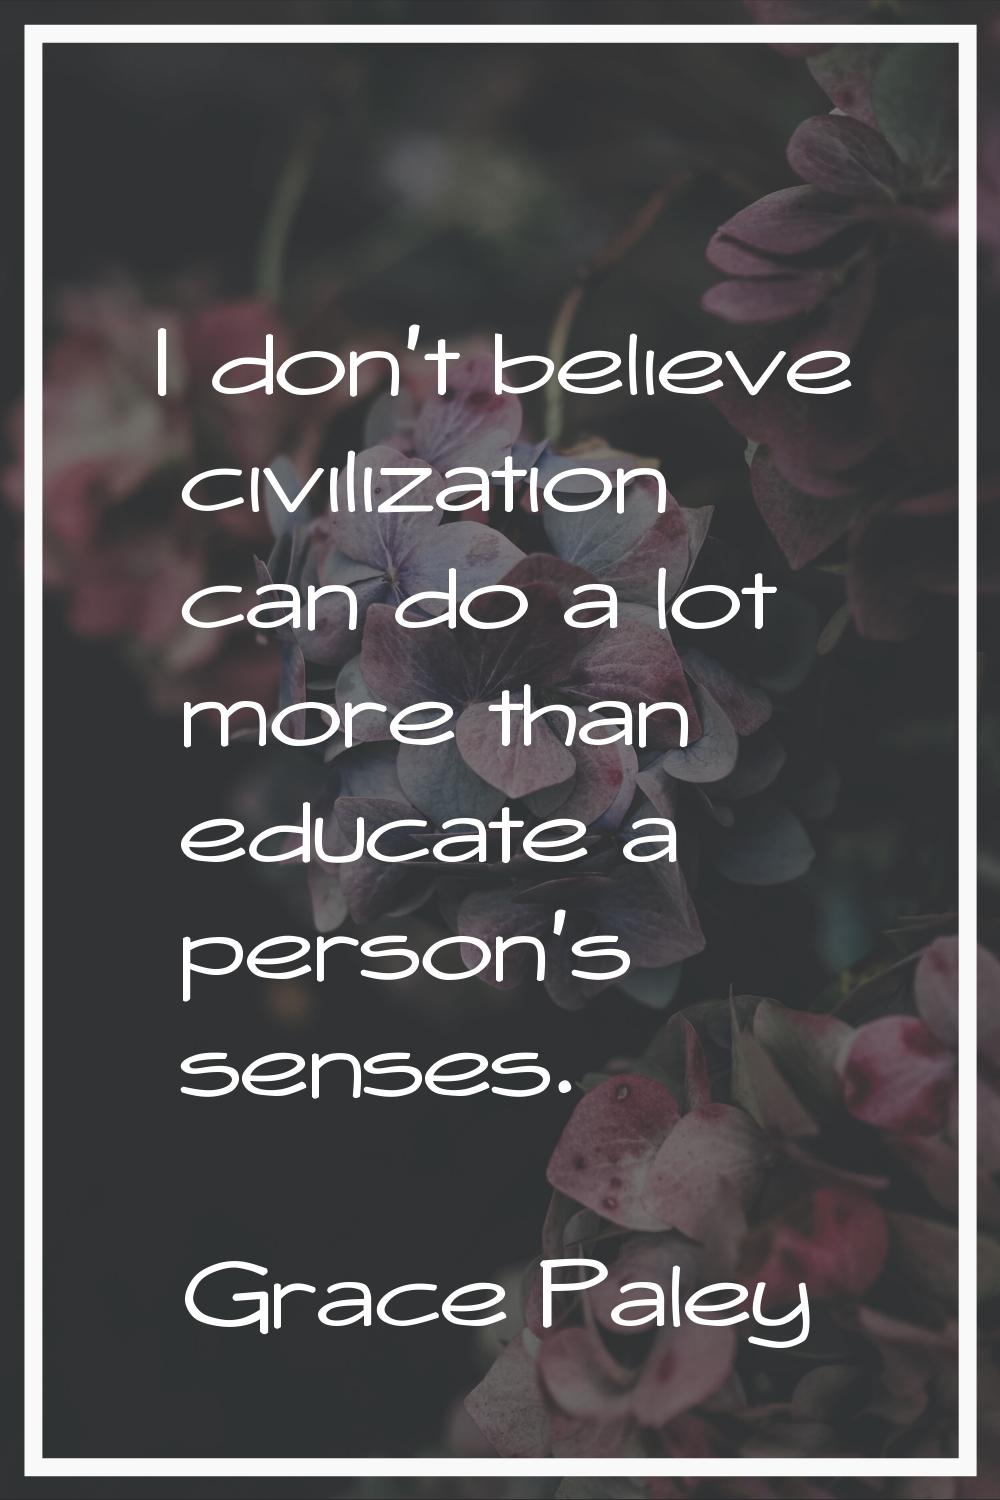 I don't believe civilization can do a lot more than educate a person's senses.